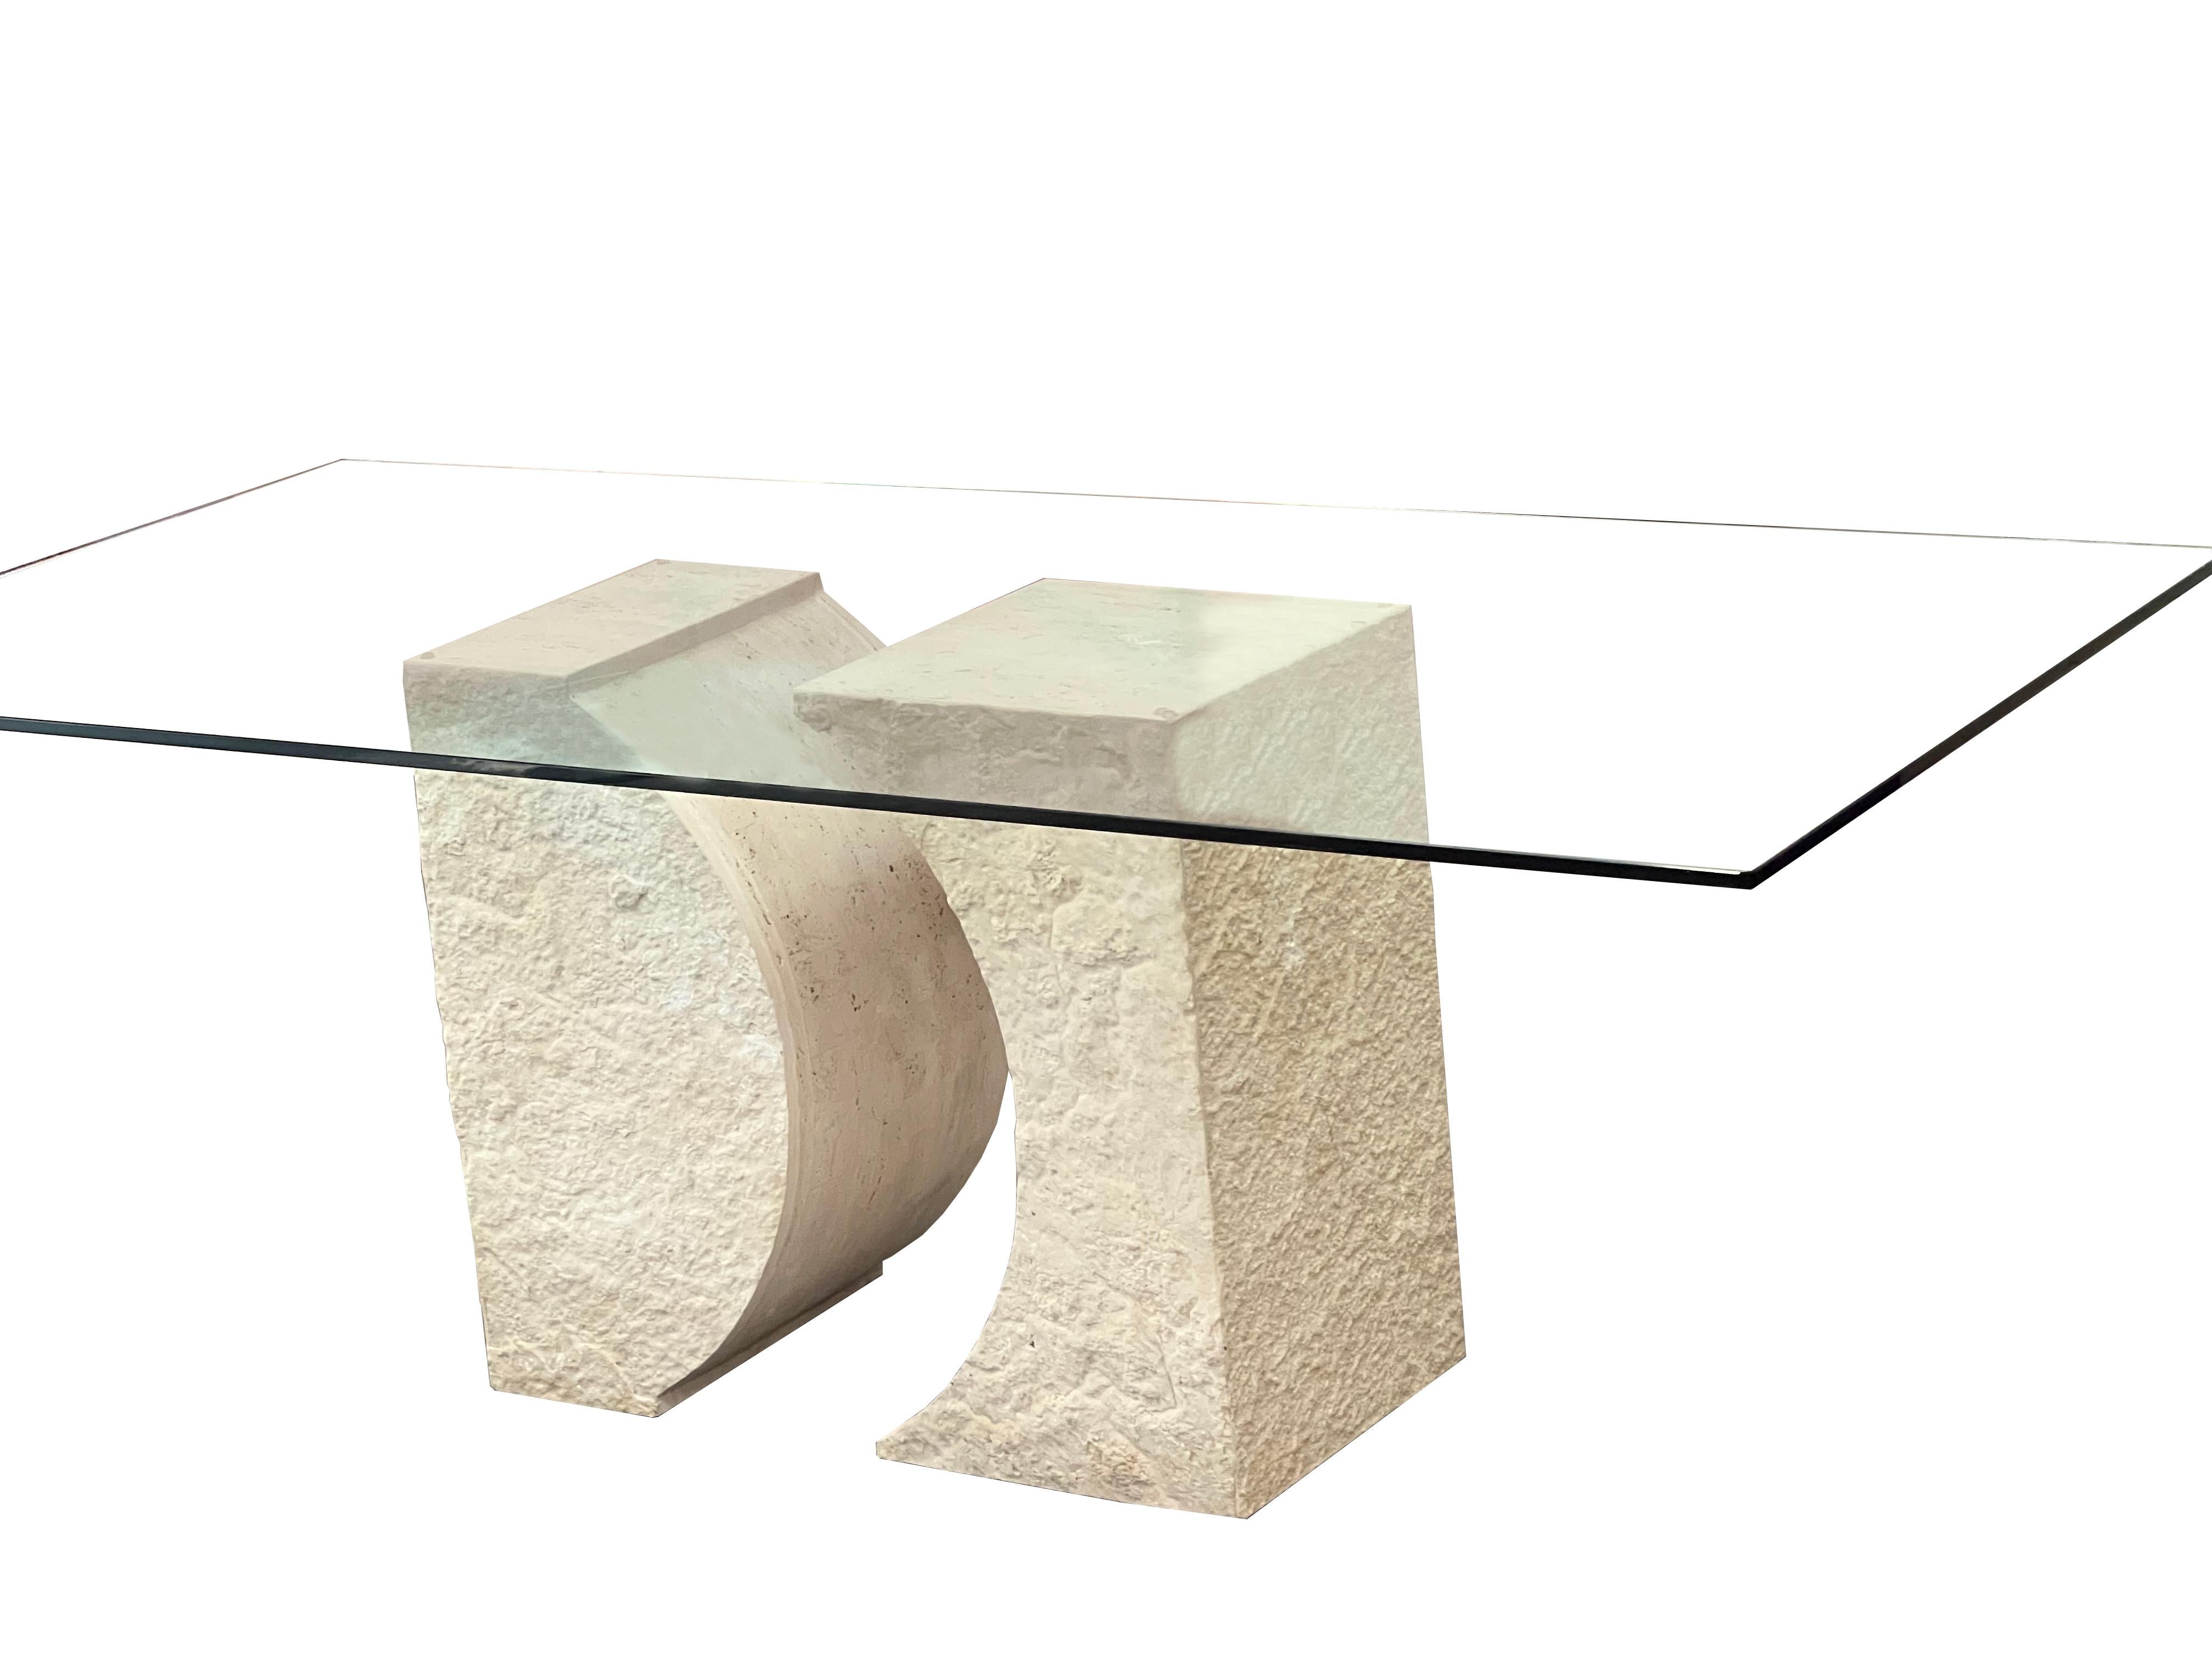 Balma Dining Table Coastal Travertine Marble MidCentury Original Limited Edition
The Balma table in coastal travertine marble is a unique original piece from the 1980s. The table was produced in limited editions, as it is a special model because of